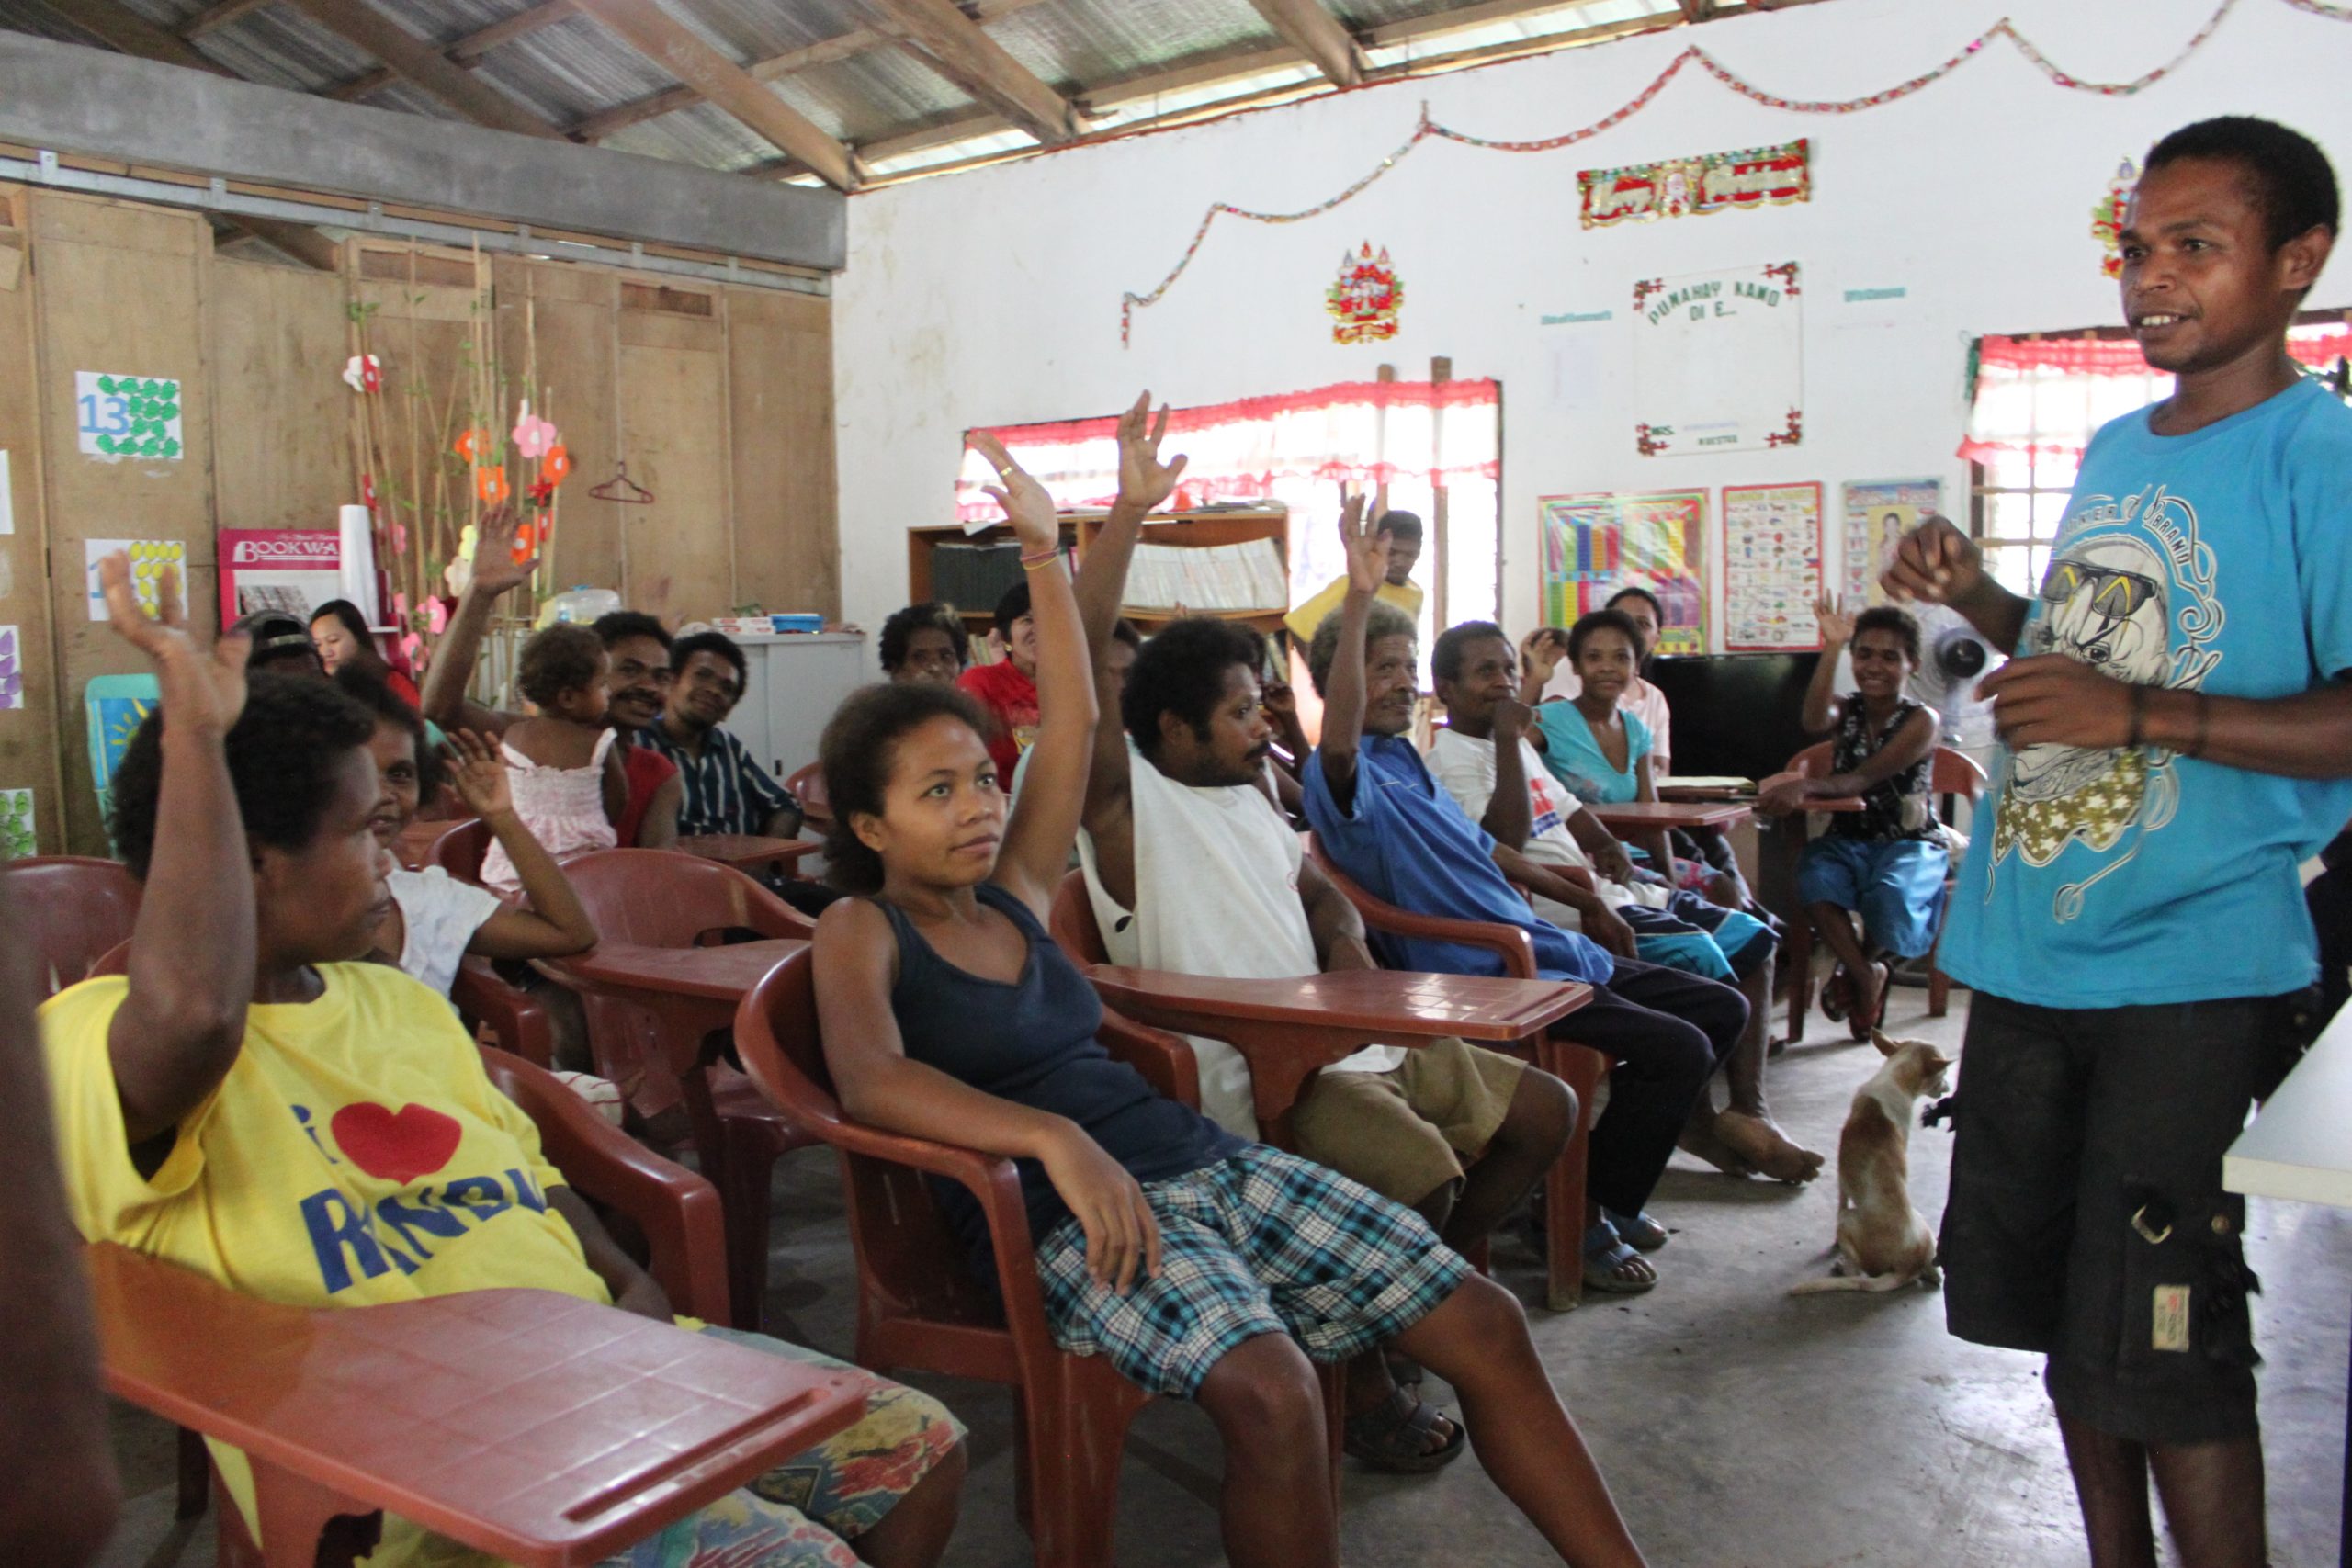 Community assembly with a Negrito ethnic group in Luzon Island, Philippines. (Image: Ophelia Persson)